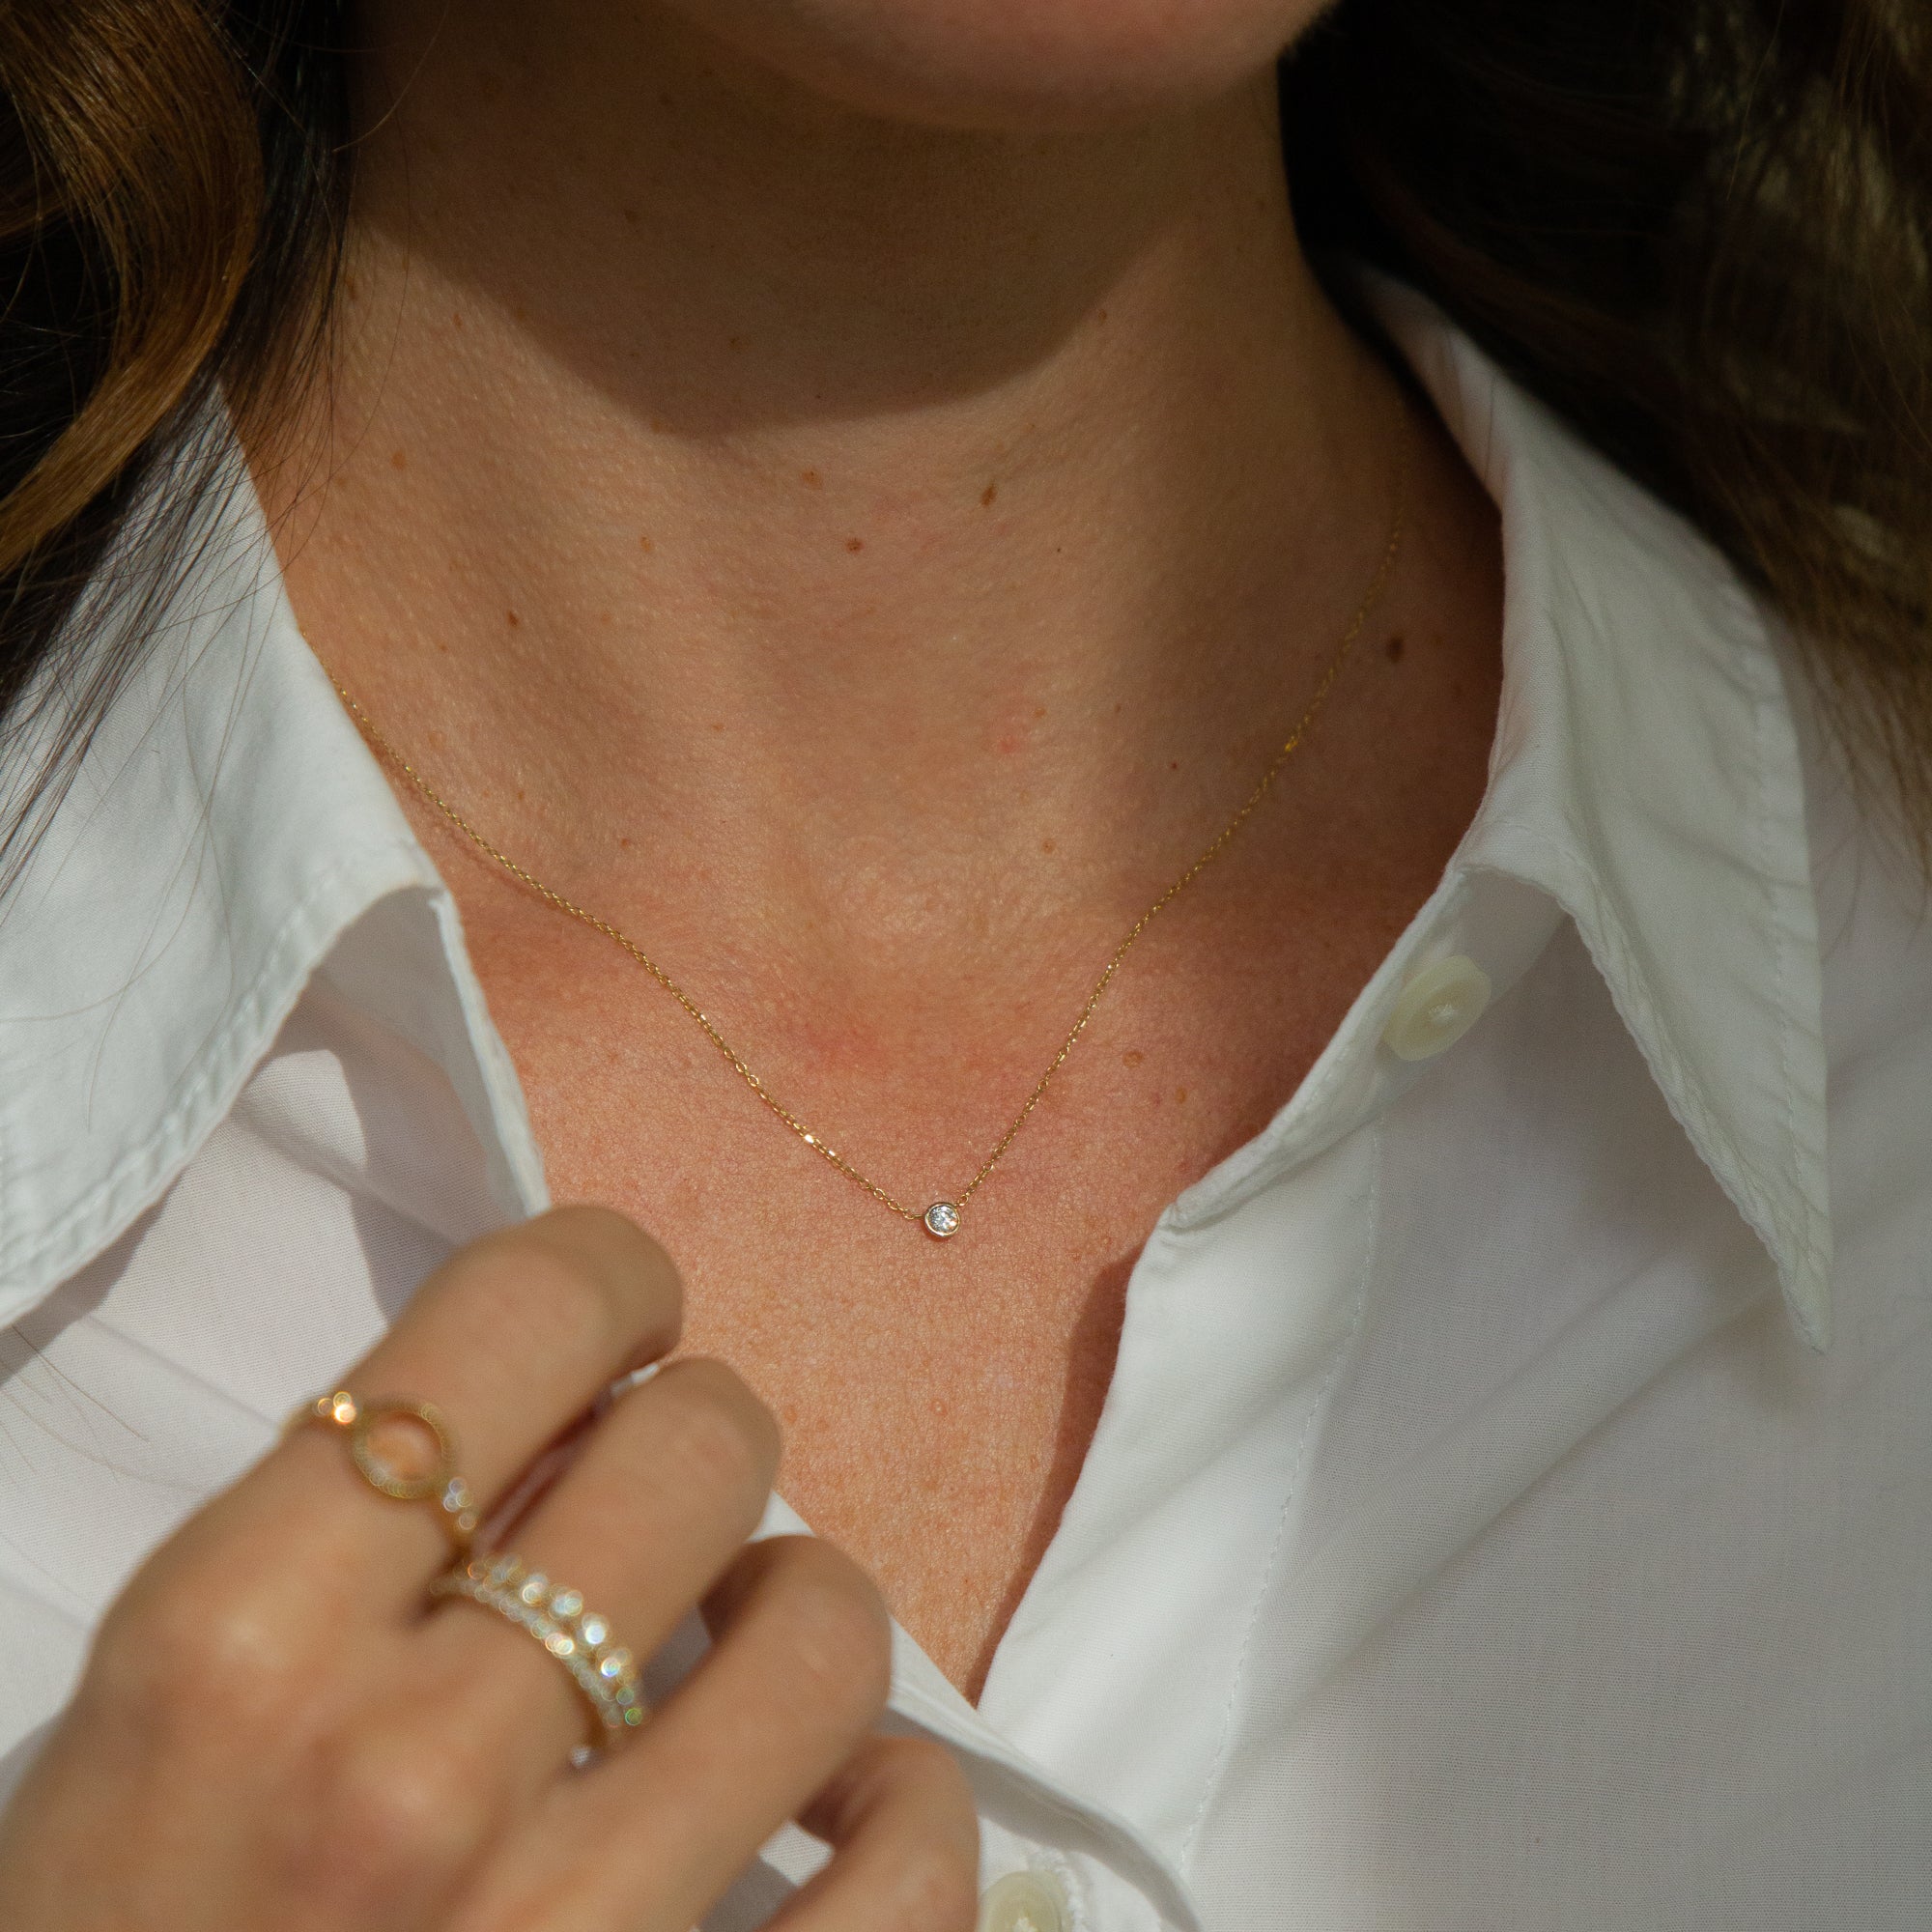 Barely-There Single Diamond Necklace